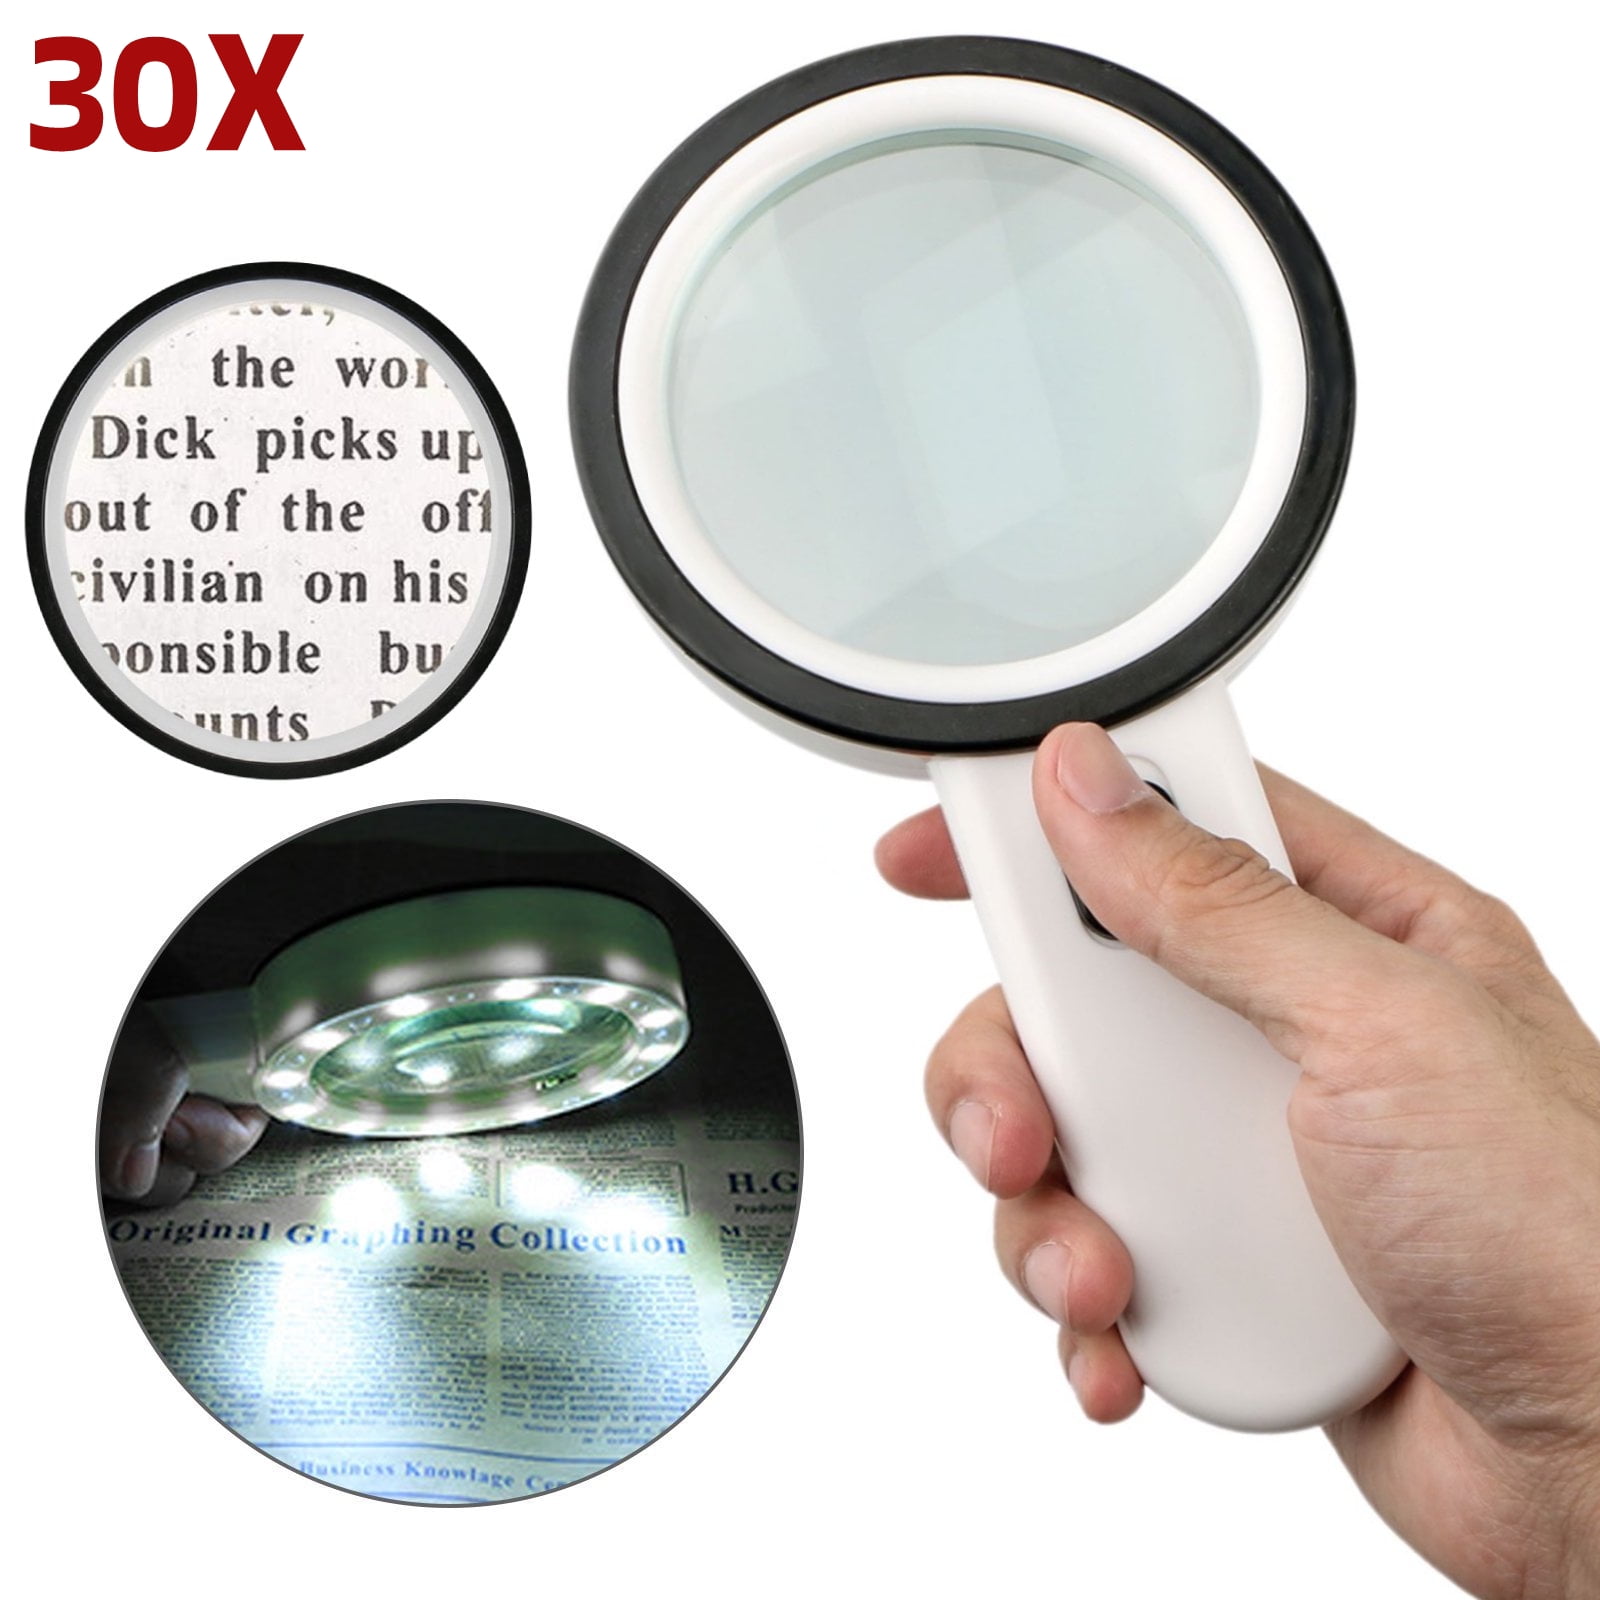 High Magnification Stamp Printing Multipurpose Personal Magnifier Jewelry Identification Handheld Magnifier LED Light HD Magnifying Glass Antique Appreciation with Scale Microscope 